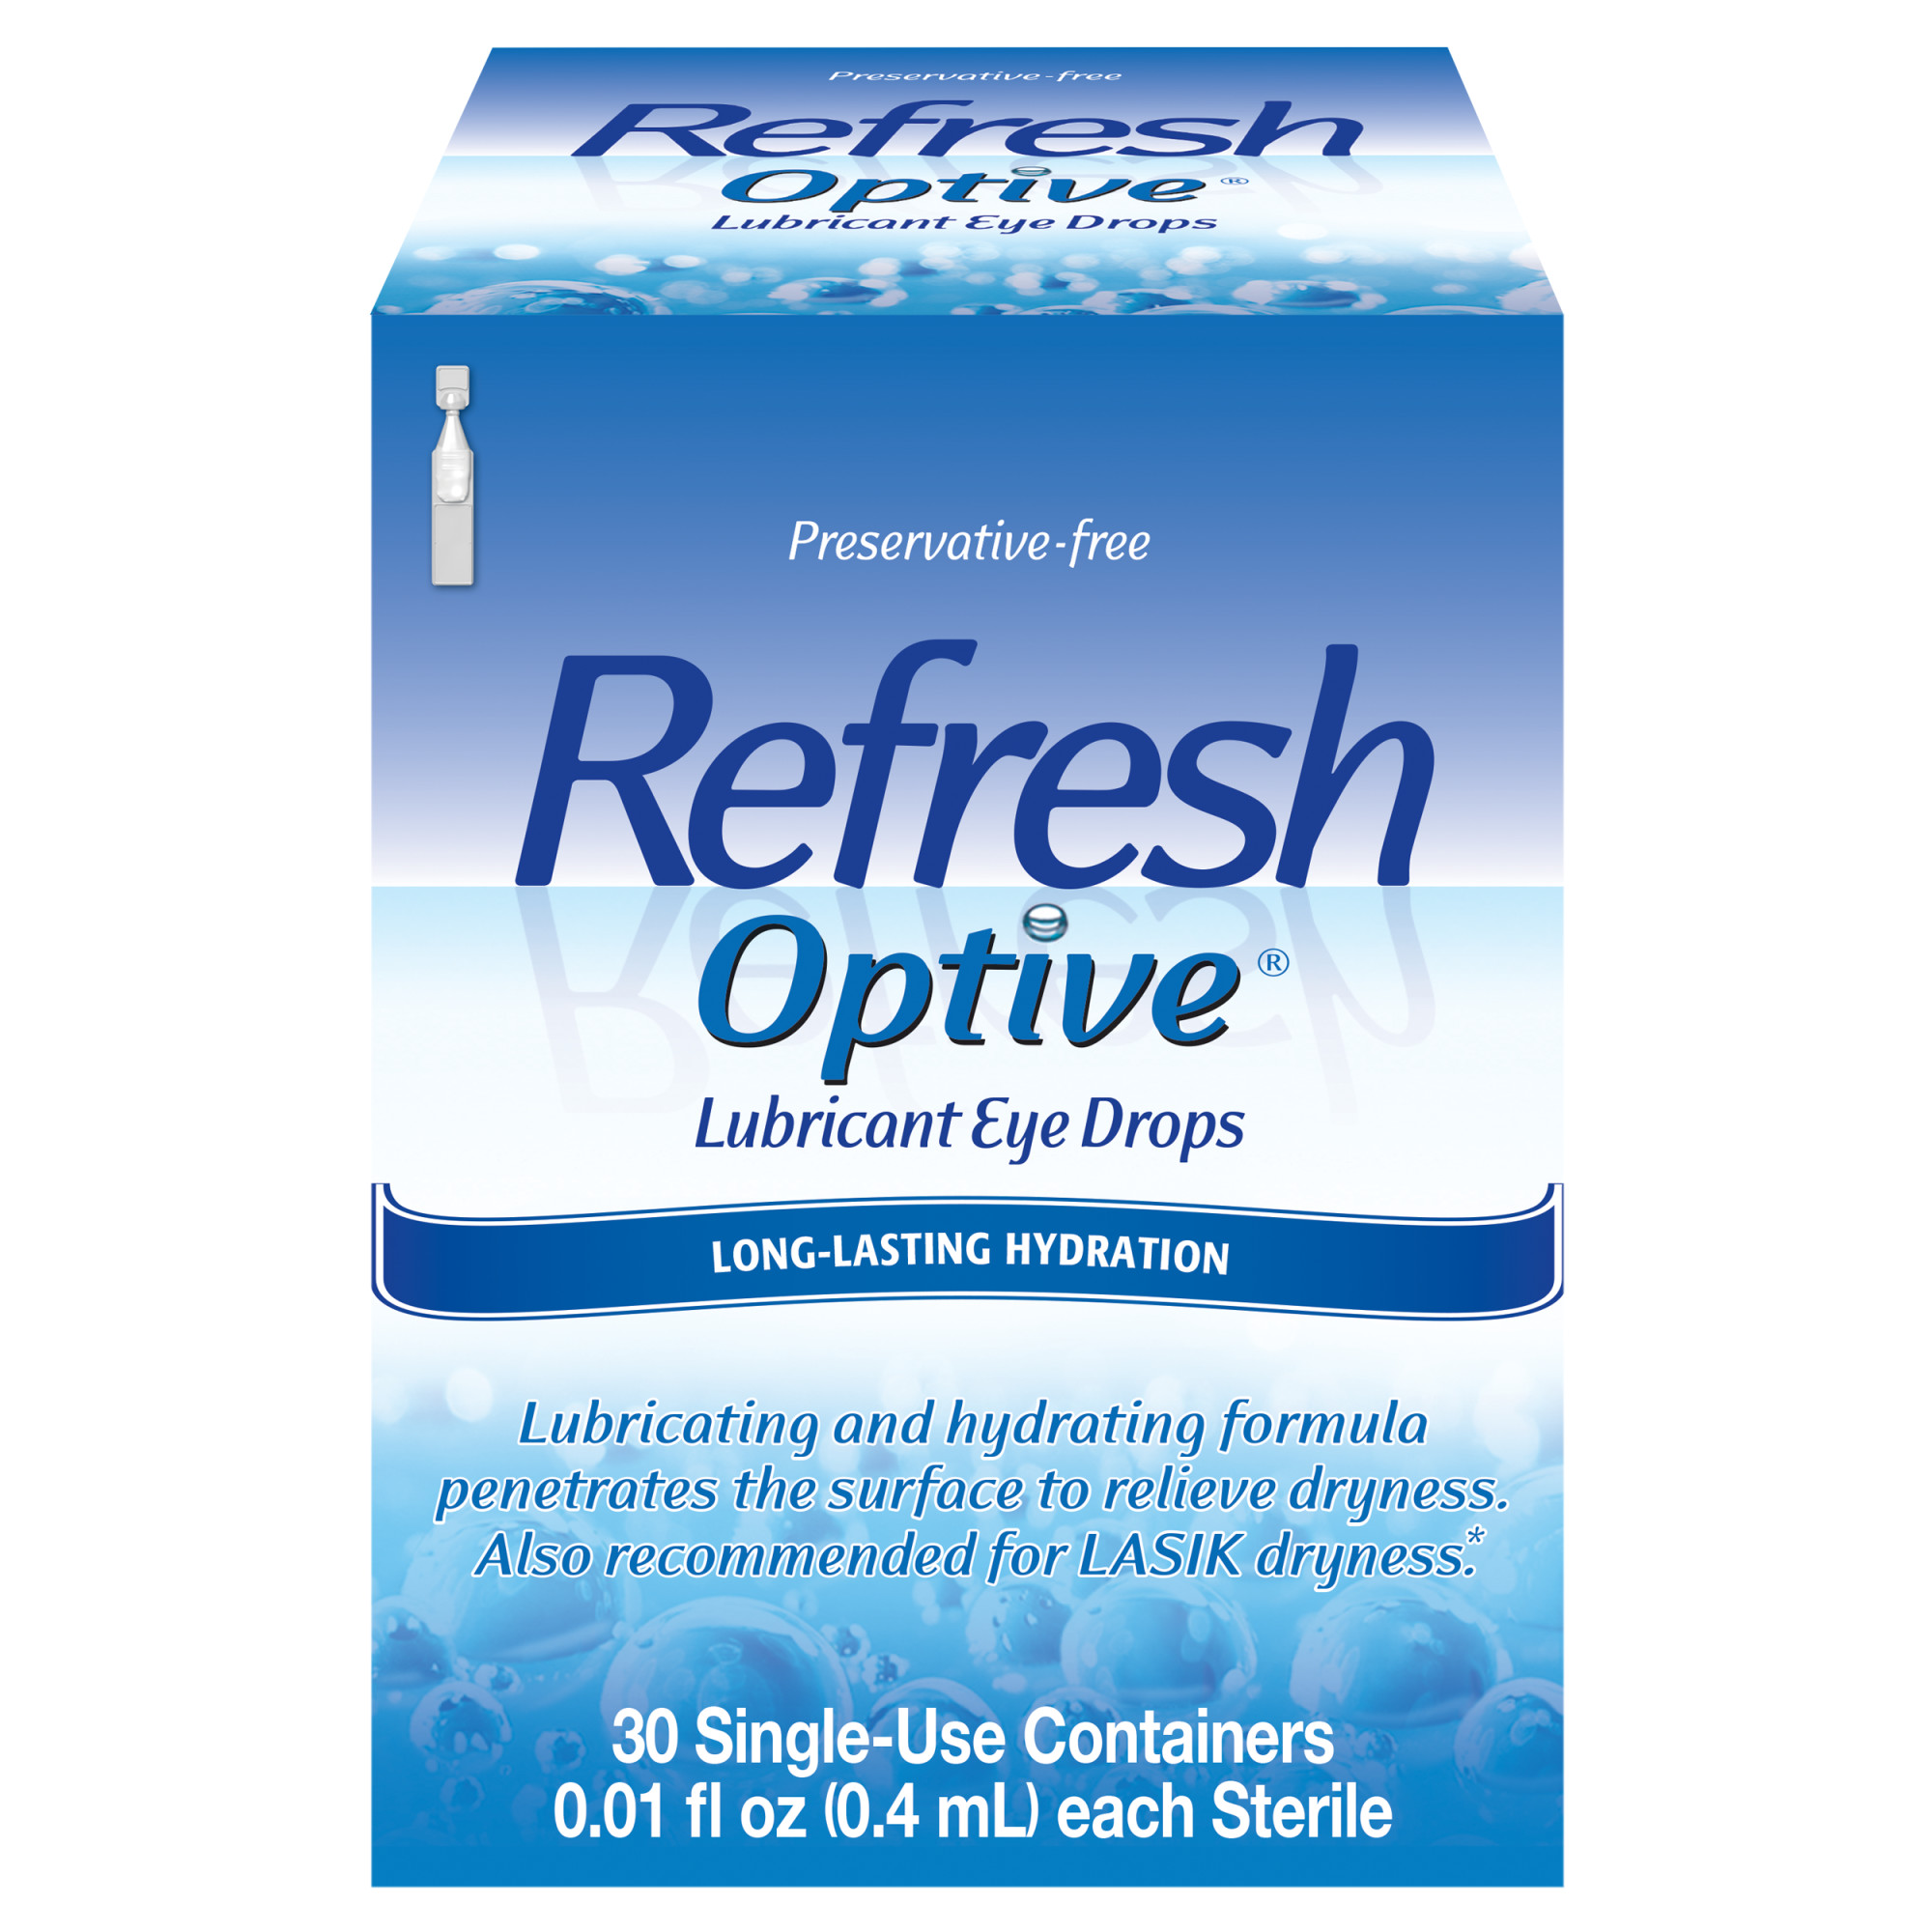 Refresh Optive Lubricant Eye Drops Preservative-Free Tears, 0.4 ml, 30 Count - image 10 of 15